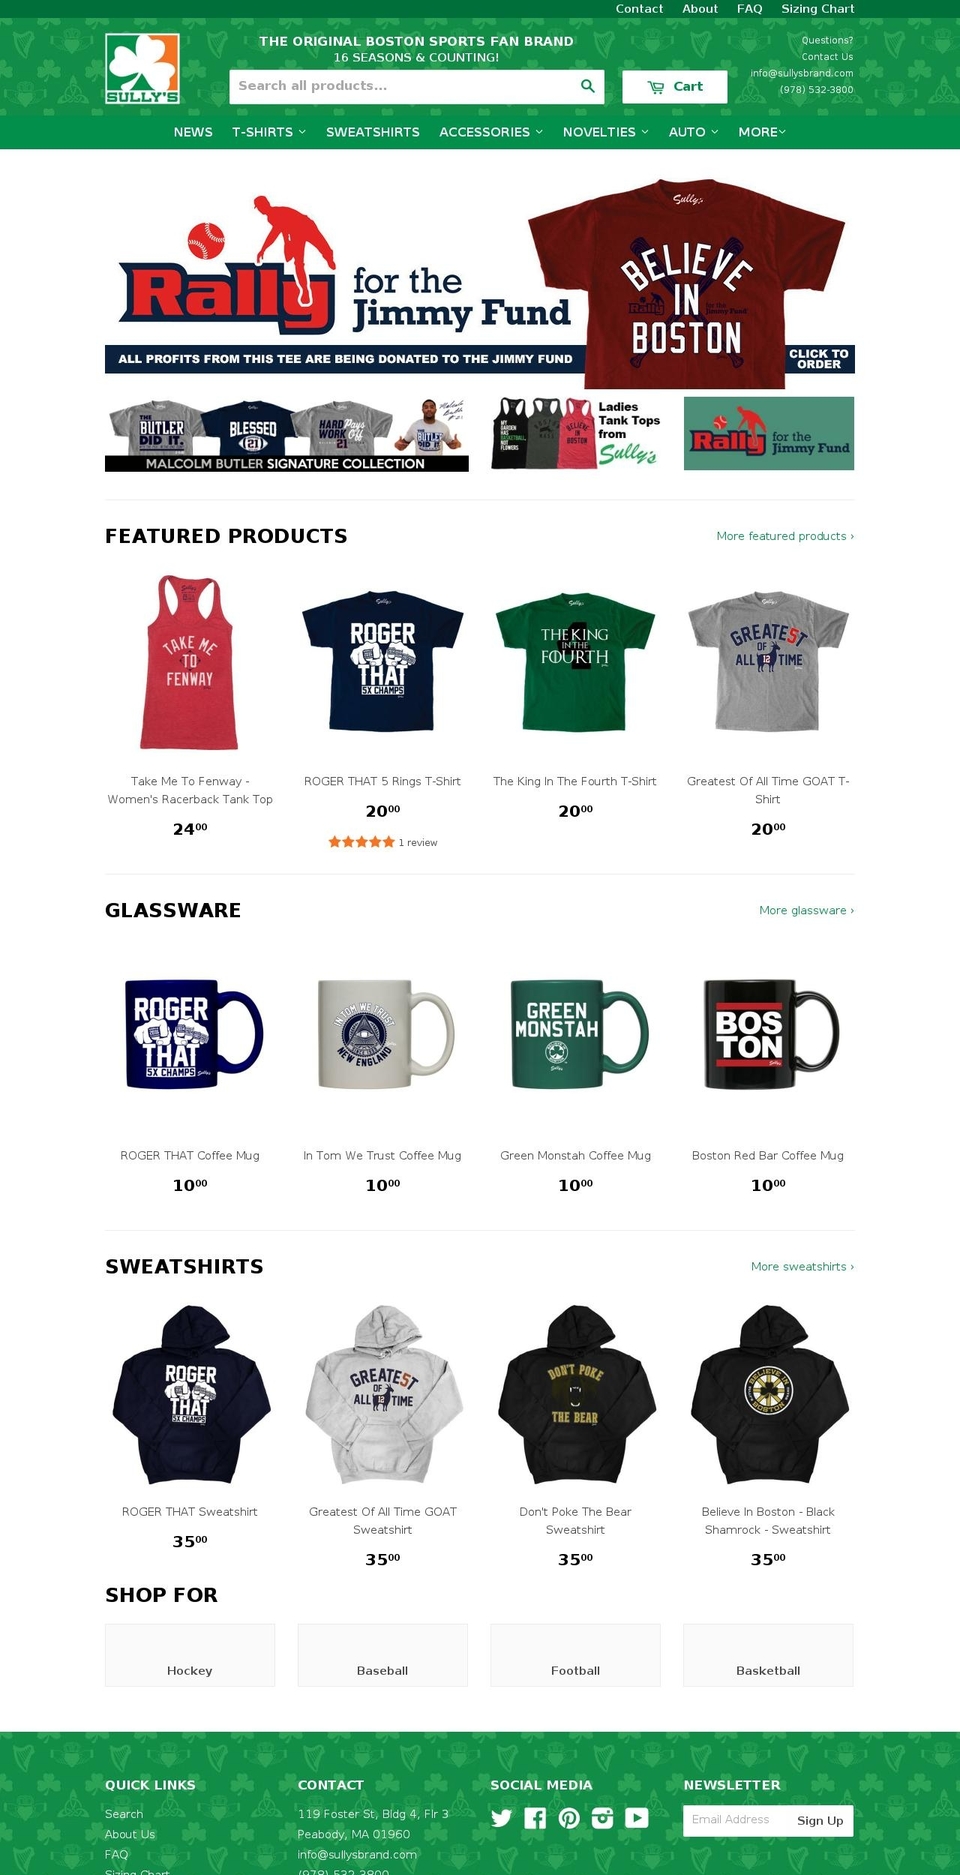 Sully's Brand Shopify theme site example fedupfan.com